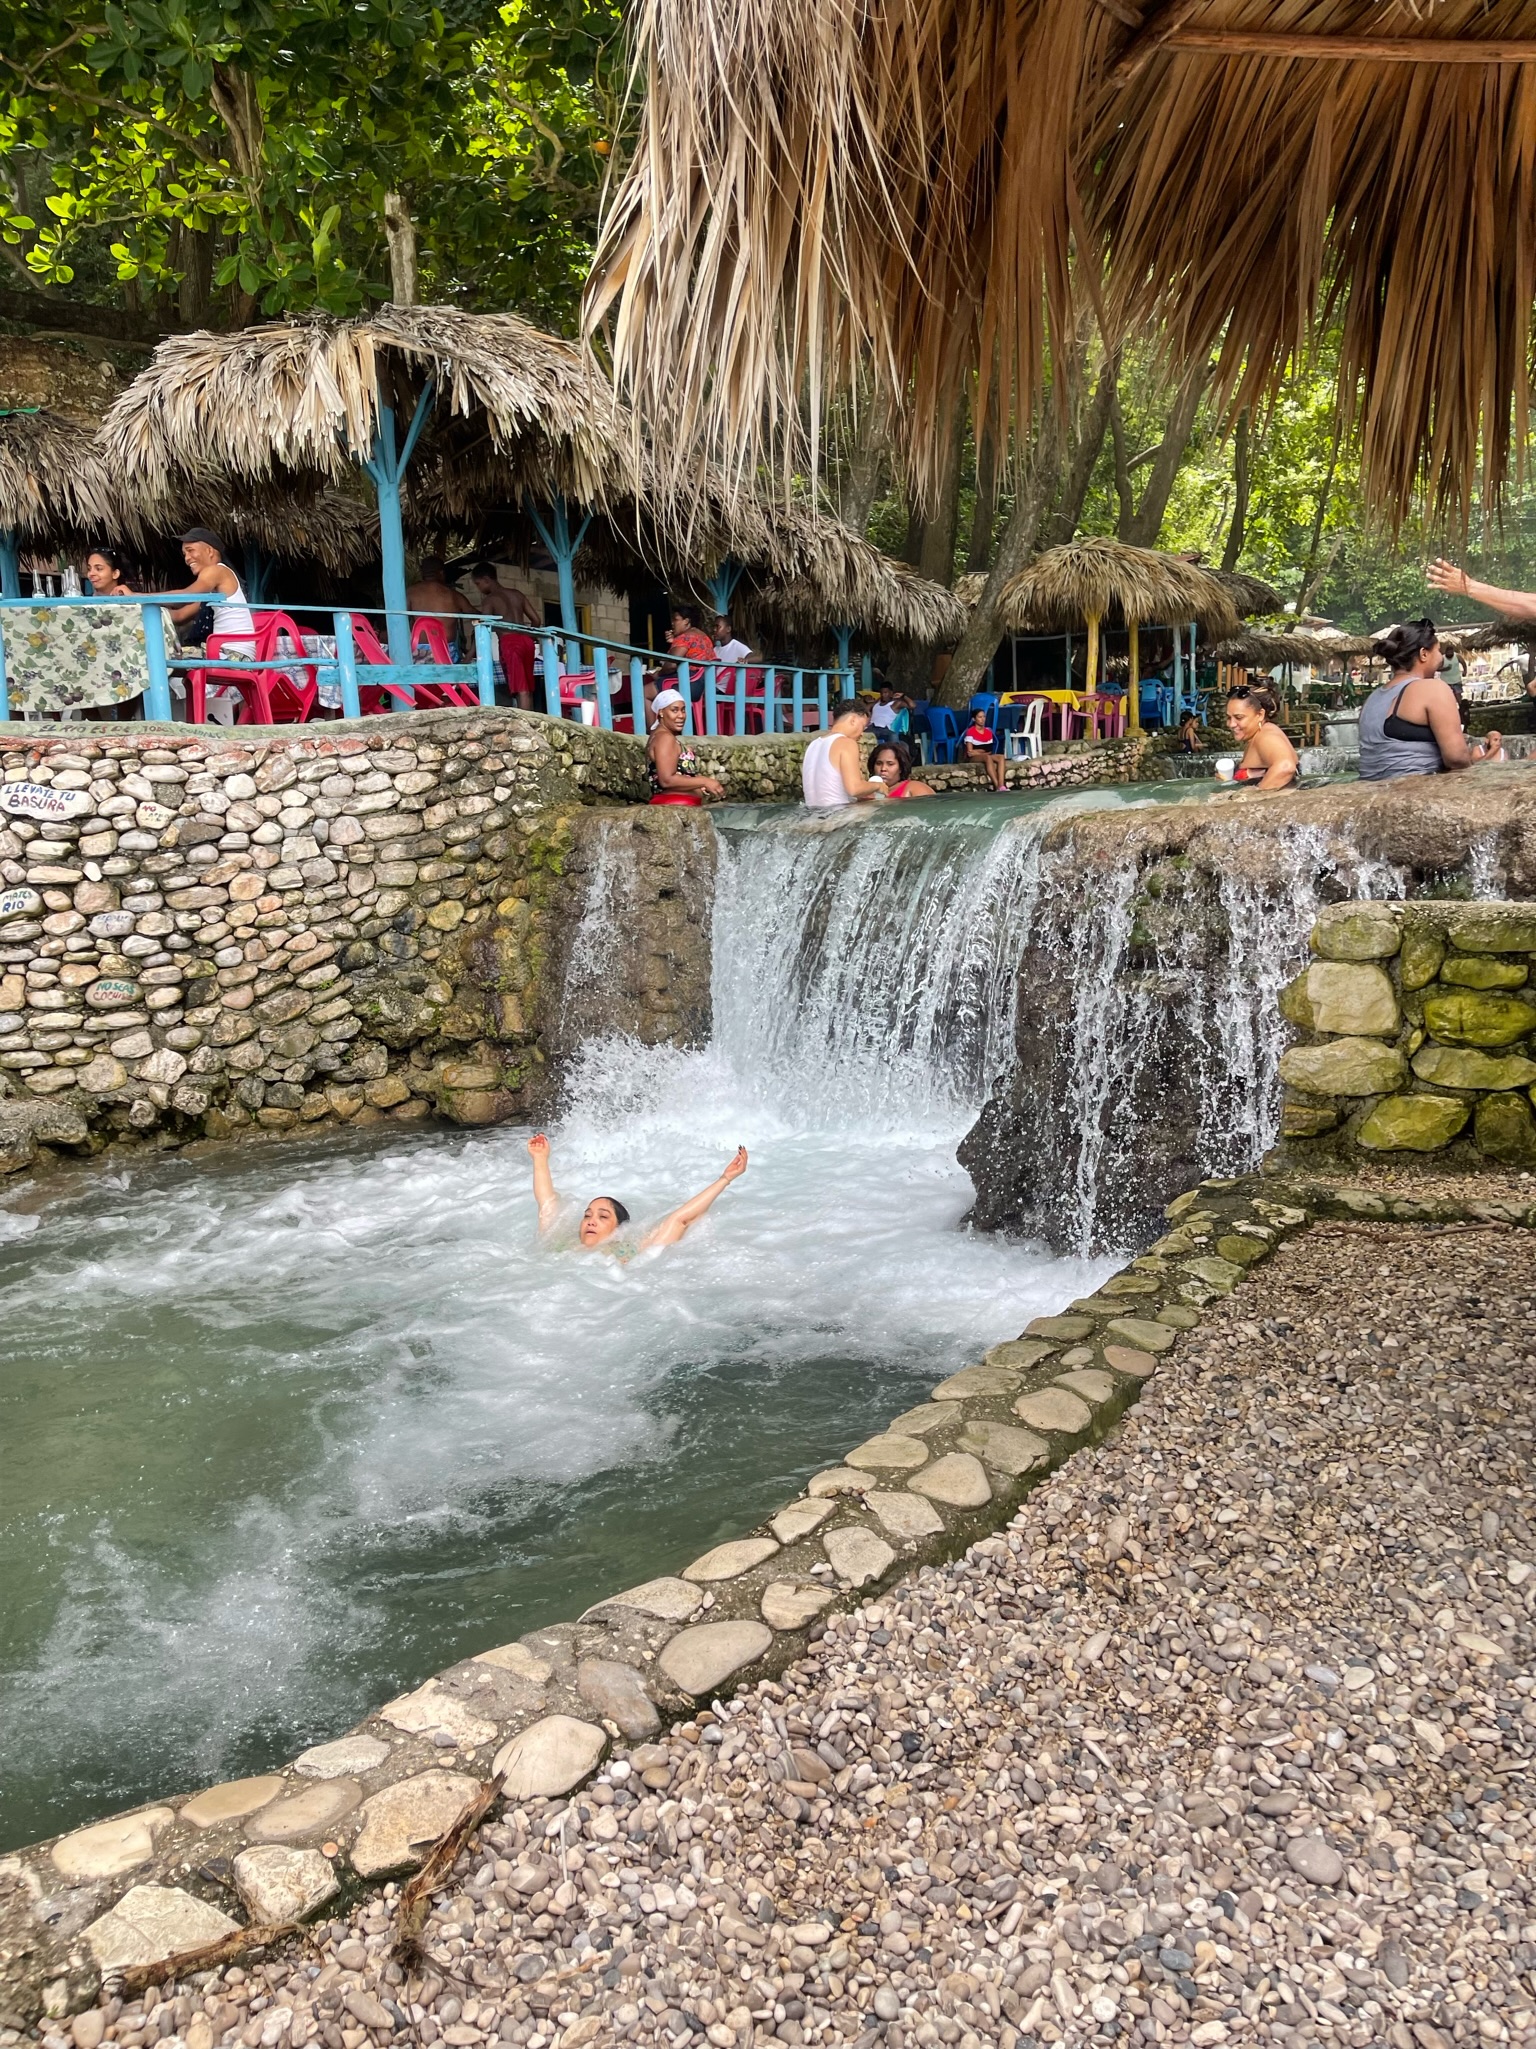 The Mercer group spent time at a San Rafael Beach in Barahona, which had river pools and cascades to play in.